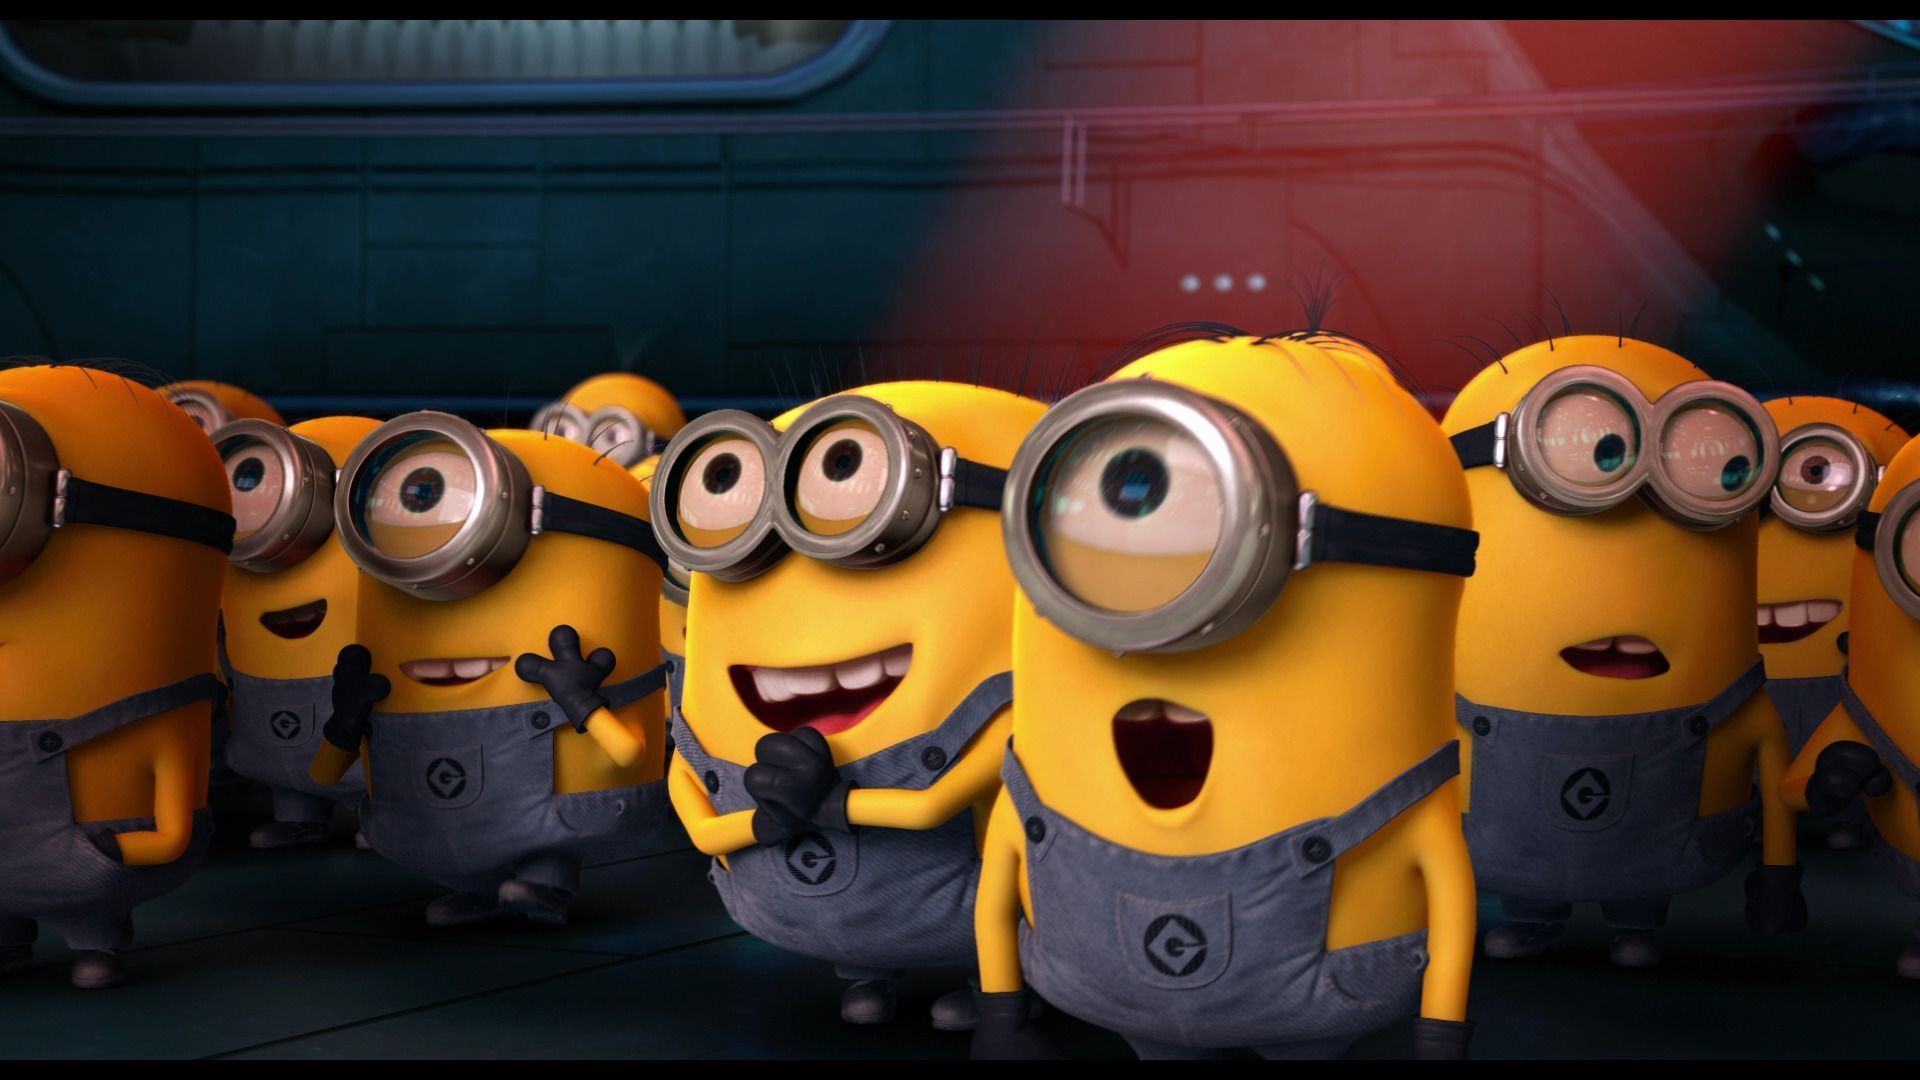 Minions Wallpapers, Pictures, Images 
 Data-src /full/192340 - Minions Wallpaper Hd - HD Wallpaper 